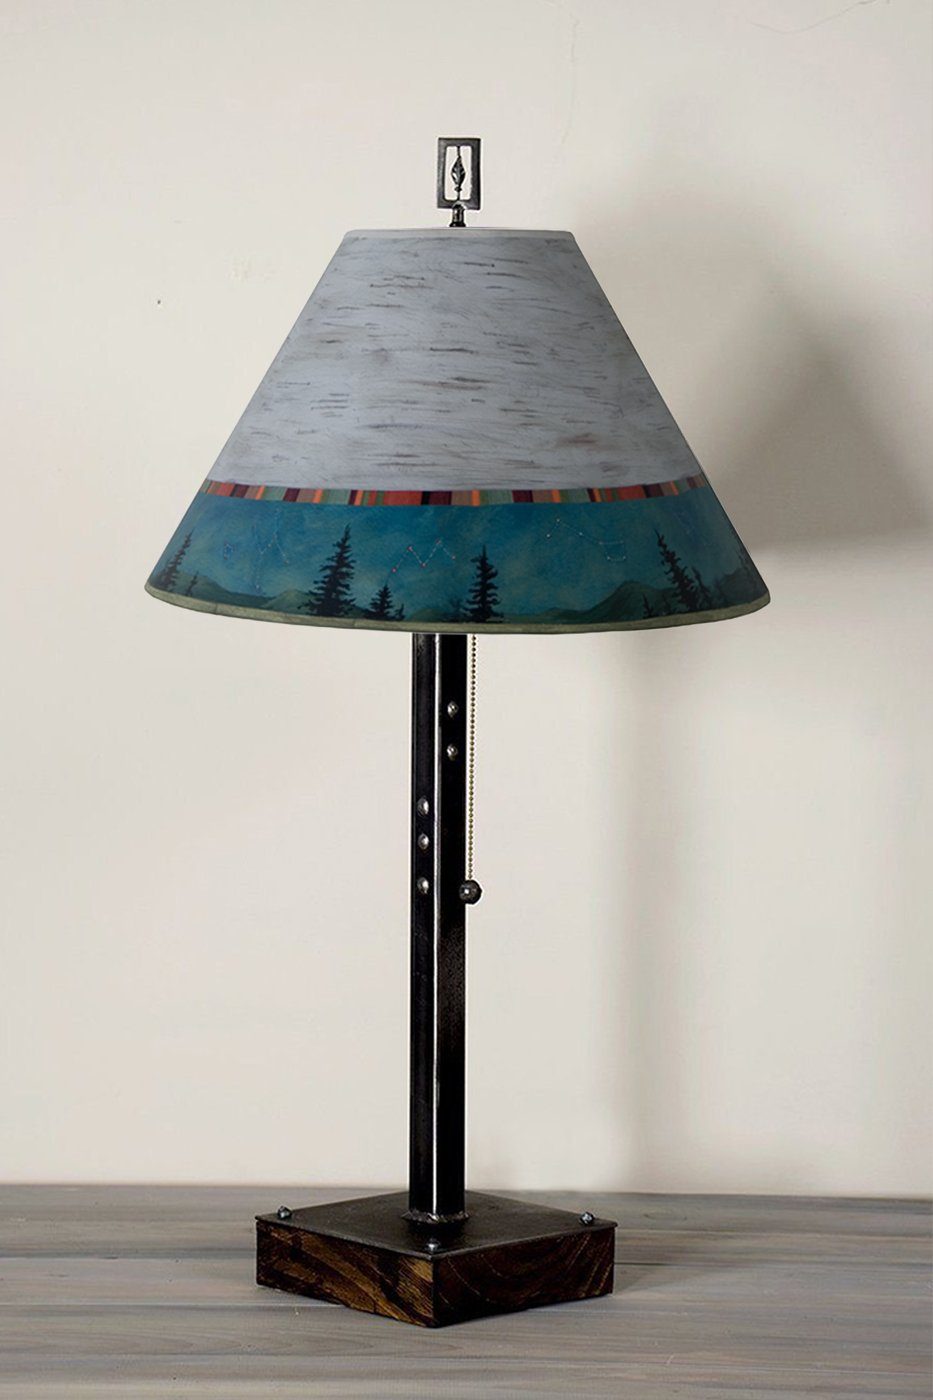 Janna Ugone & Co Table Lamps Steel Table Lamp on Wood with Medium Conical Shade in Birch Midnight